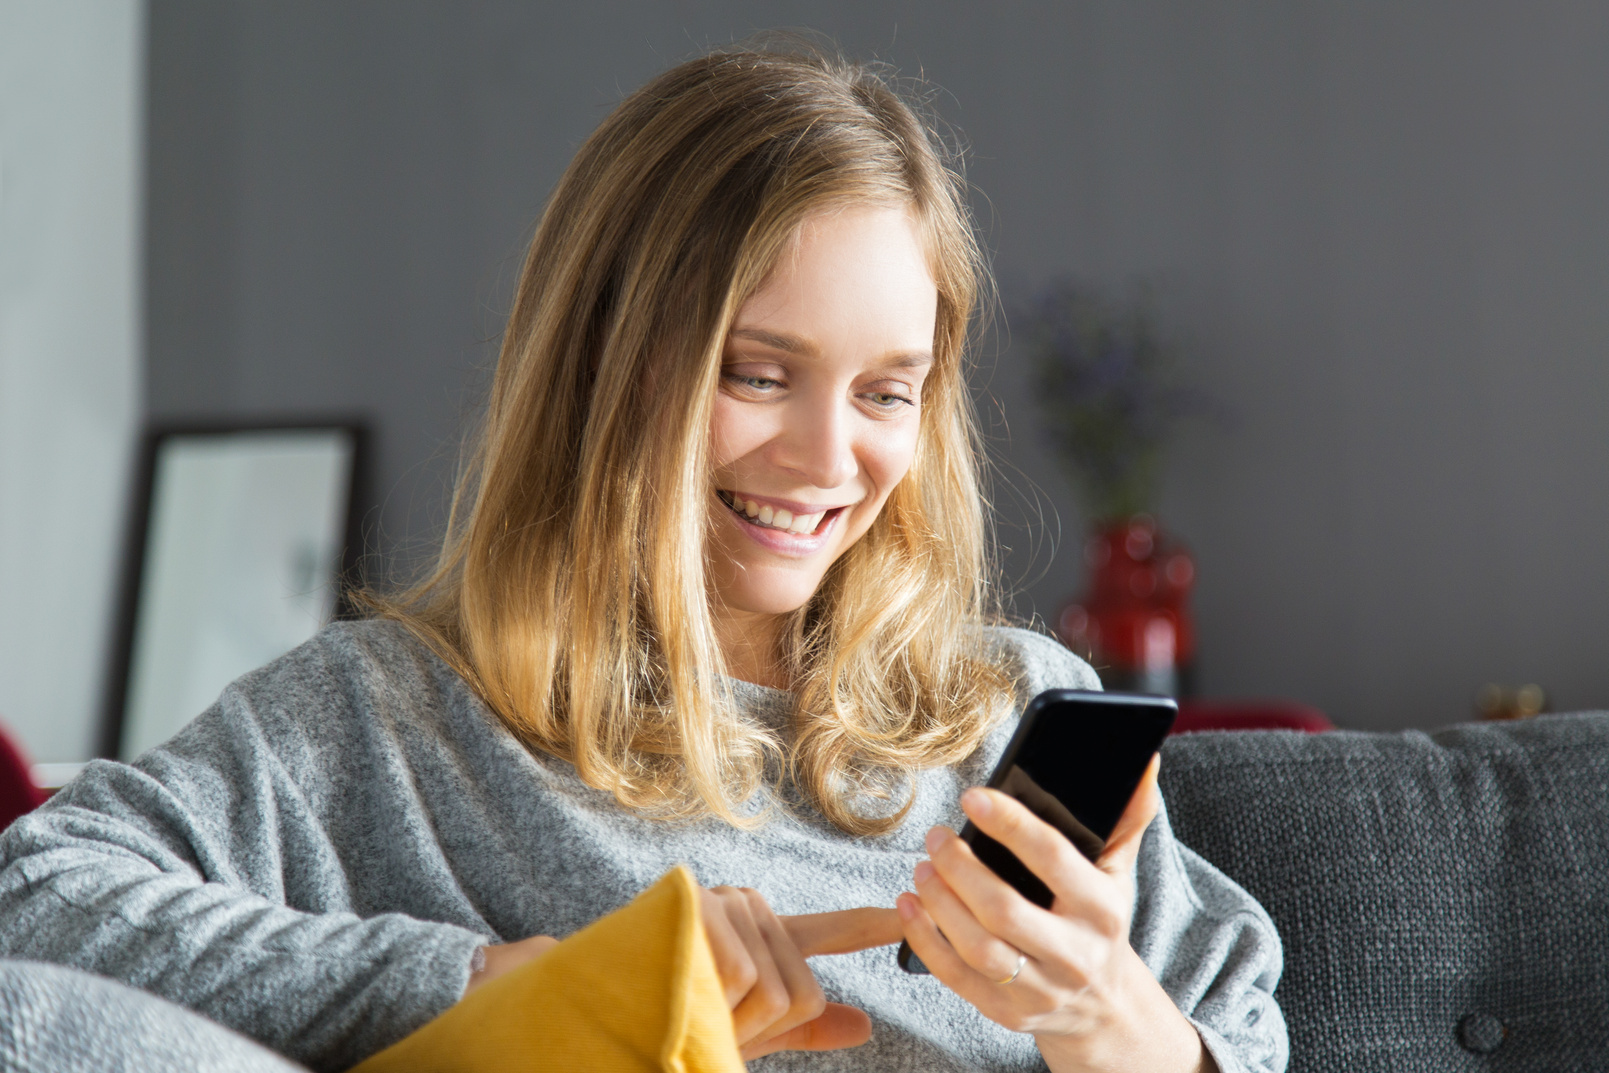 Cheerful phone user excited with new mobile app